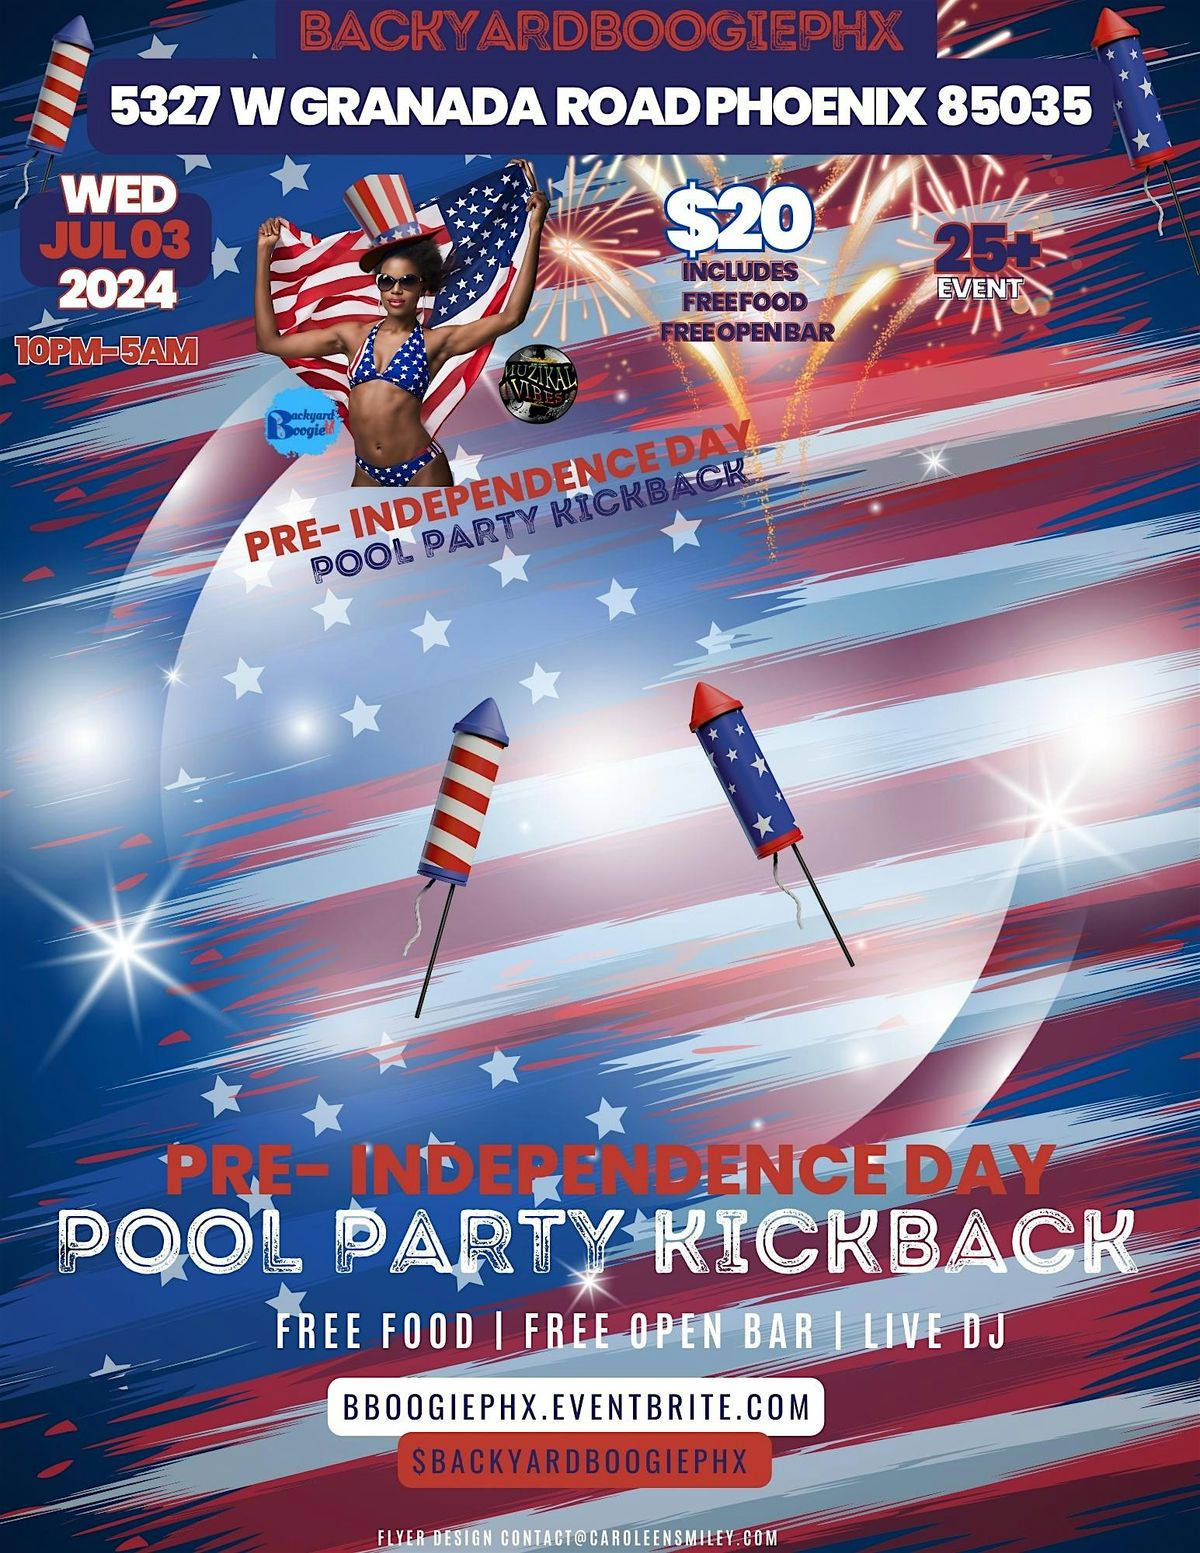 PRE-INDEPENDENCE DAY POOL PARTY KICKBACK